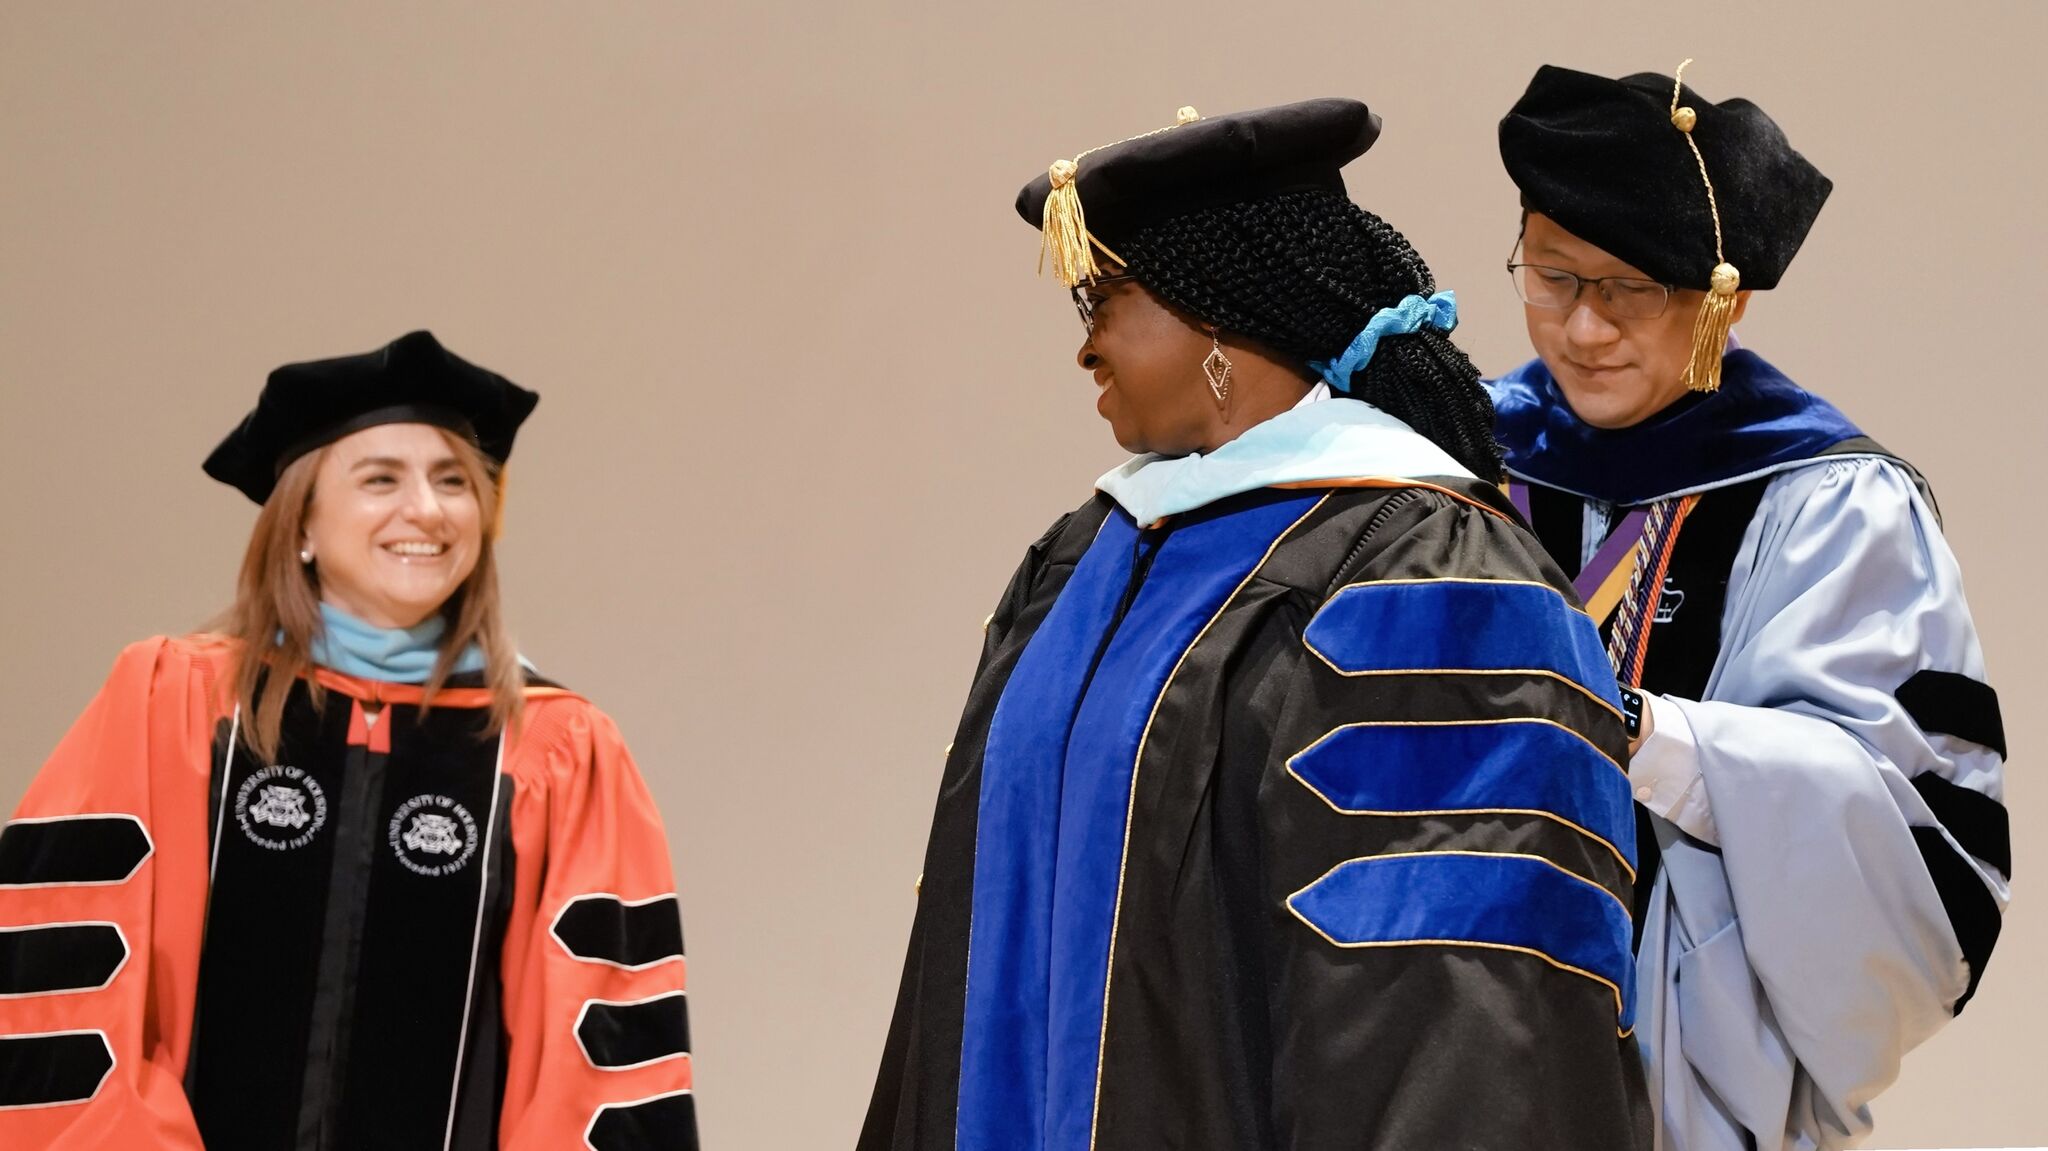 Doctoral candidate Ntiense Otu is hooded by Co-Chair Dr. Ming-Tsan Lu, during the inaugural Doctoral Hooding Ceremony